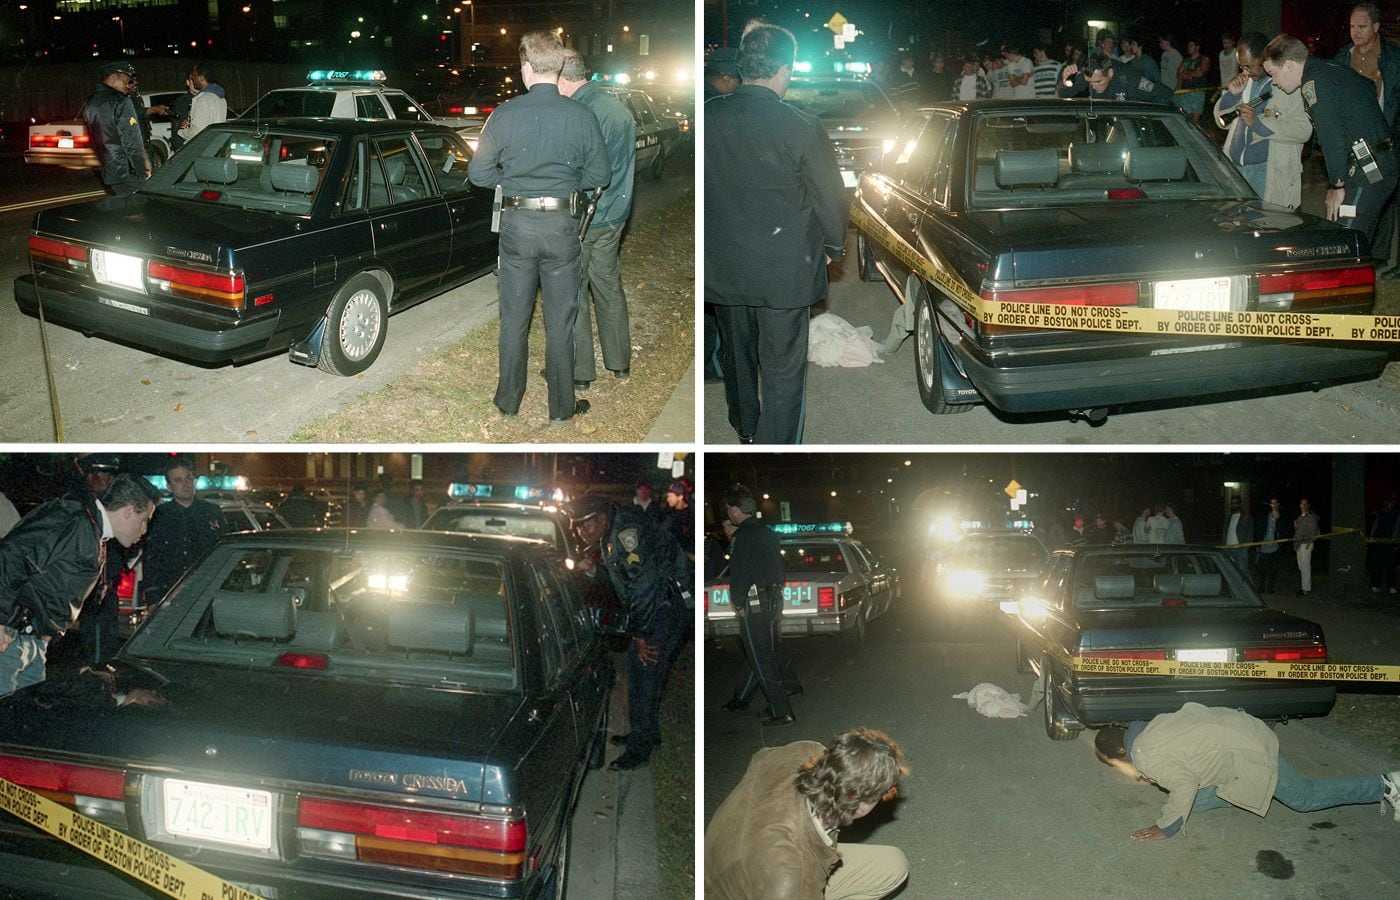 Police investigated Charles Stuart’s car at the scene of the shooting in Mission Hill on Oct. 23, 1989. (Tom Herde/Globe Staff)